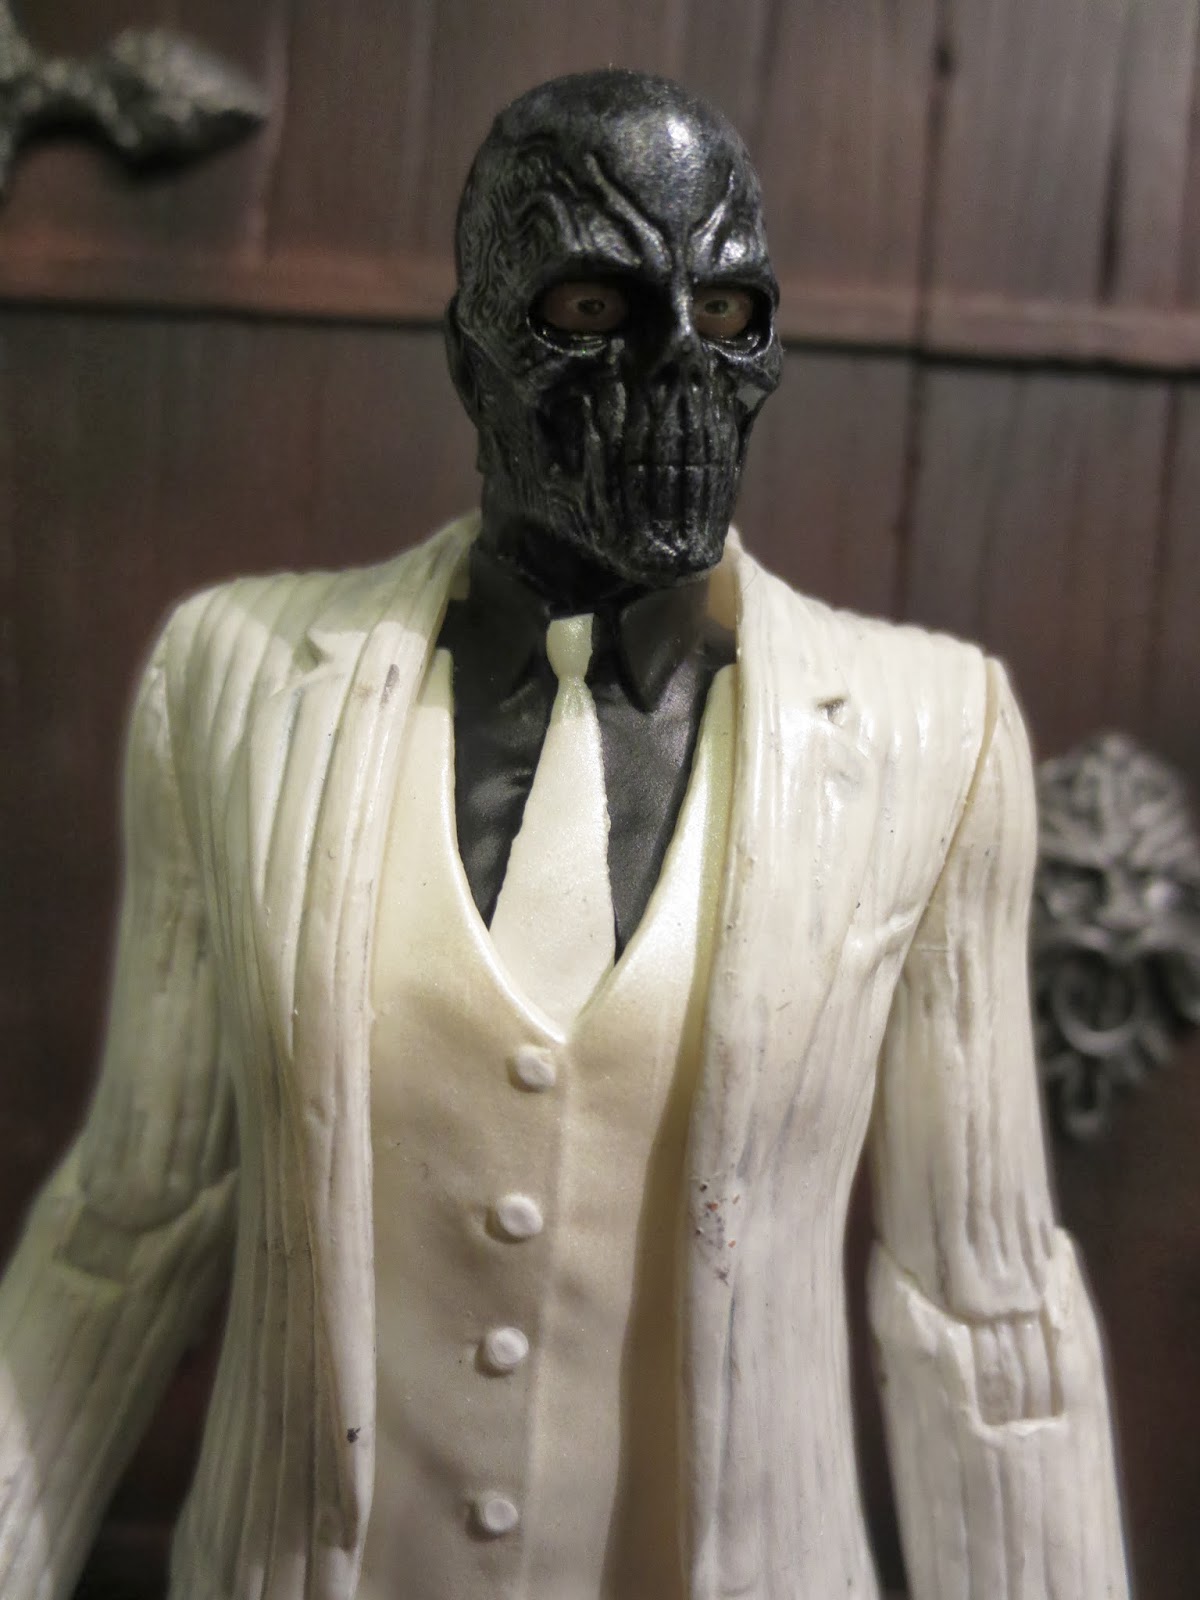 Action Figure Review: Mask from Arkham Origins by DC Collectibles